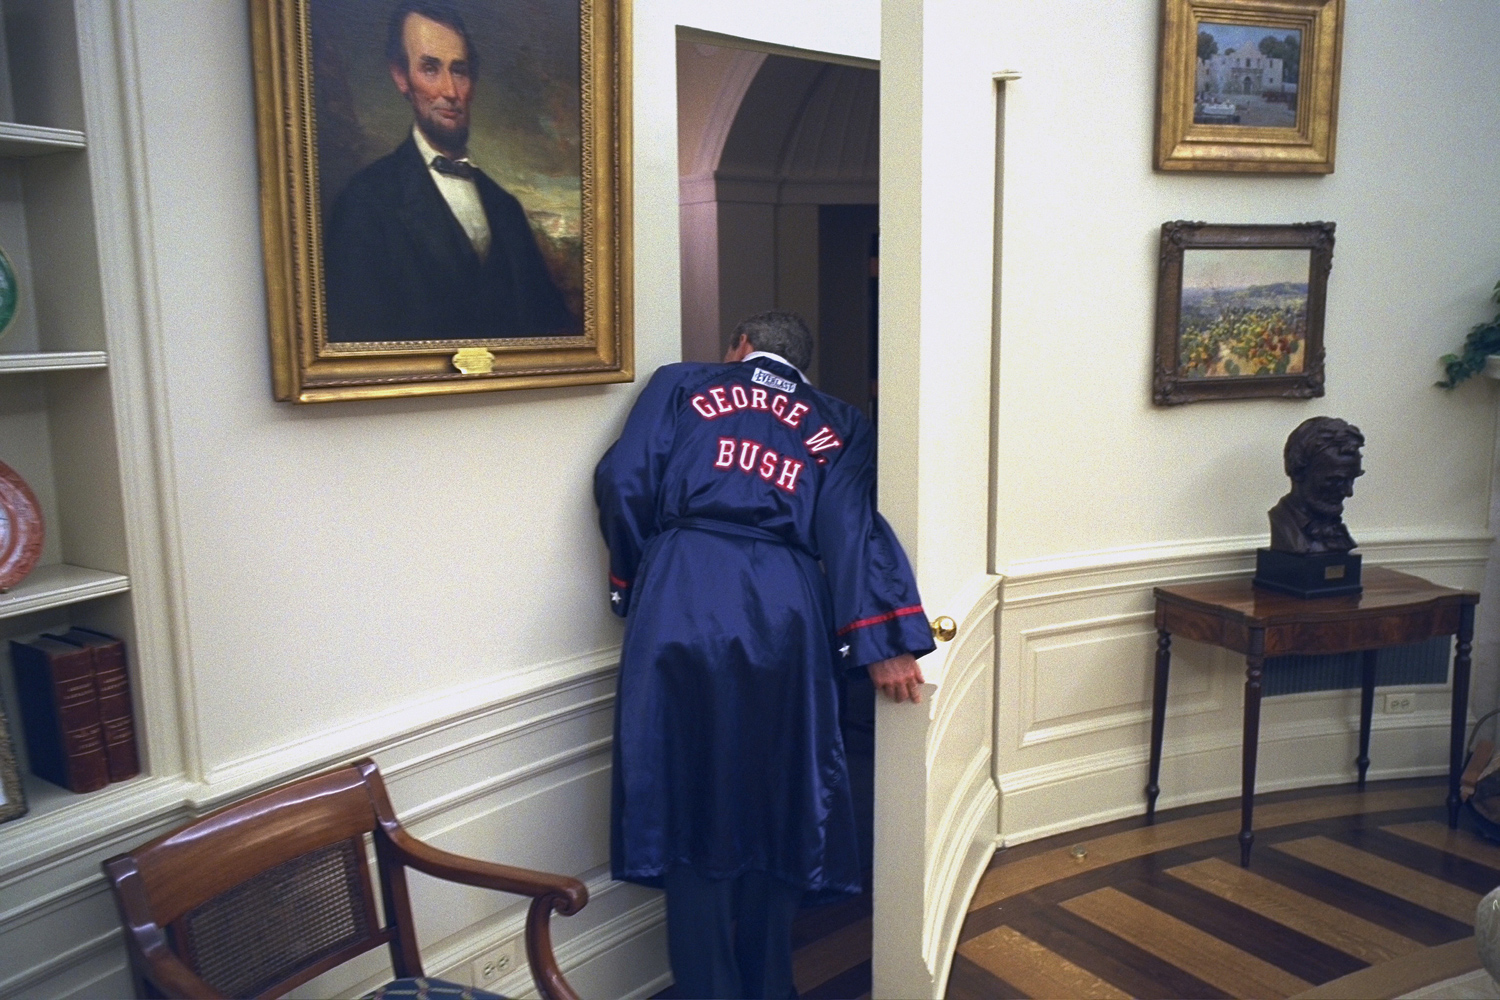 Oct. 8, 2002. In a light moment, President Bush, wearing a  George W. Bush  boxing robe, peeks around the Oval Office doorway into the hallway.“President Bush was mostly a serious leader, tackling serious issues. But this sense of humor provided a break for many of us in the White House.”